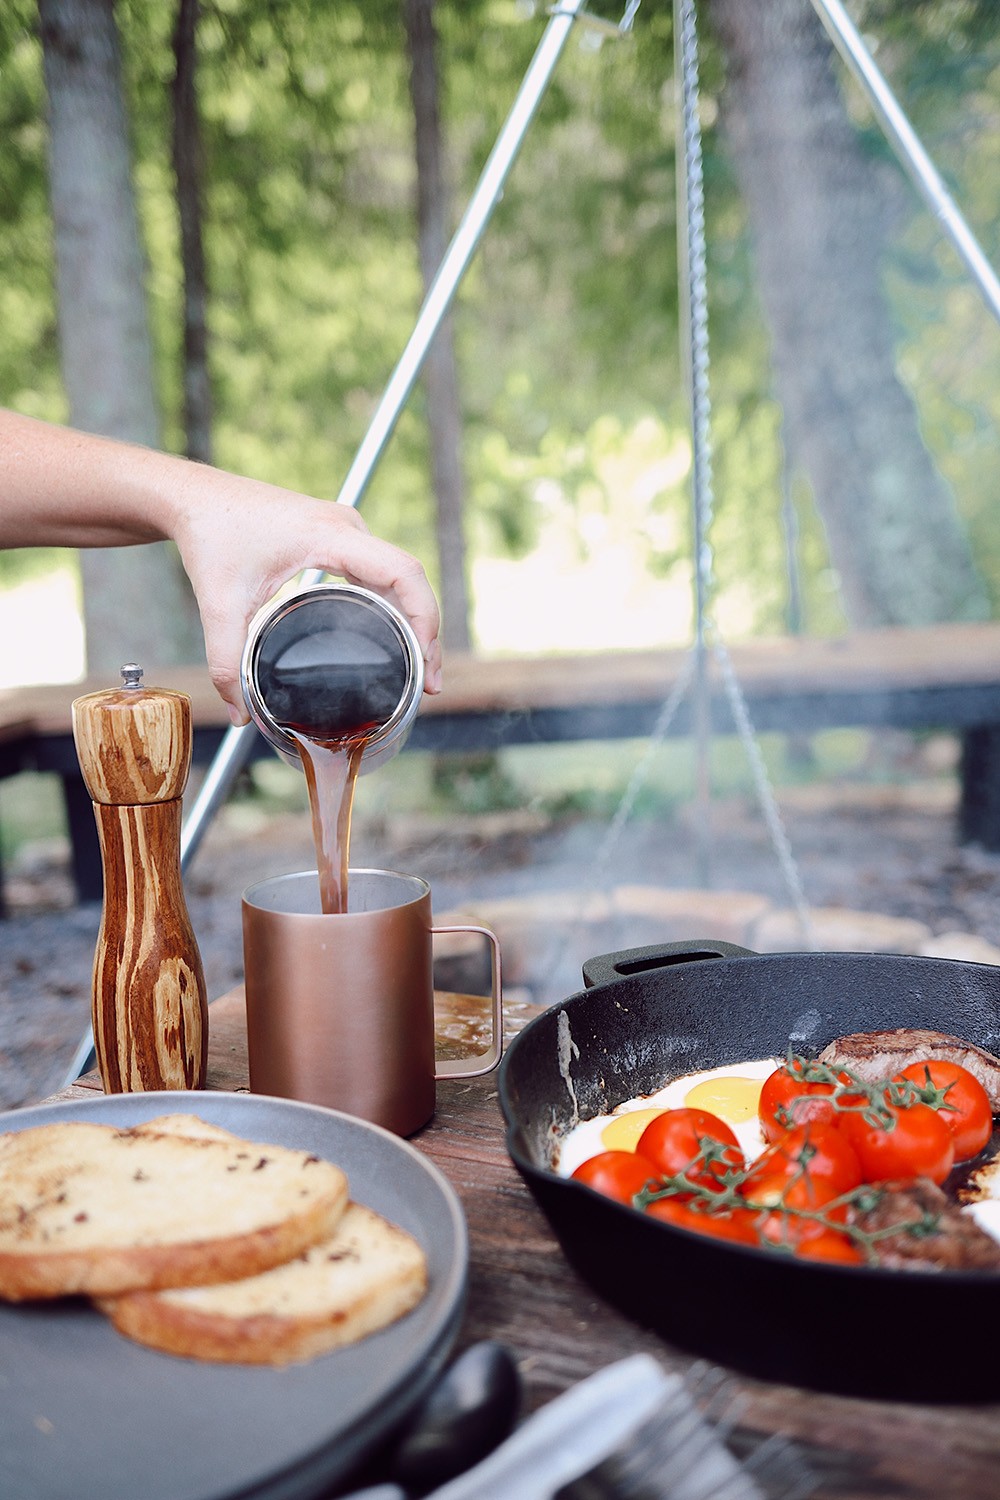 Over the Fire Cooking Steak and Eggs Breakfast for a Delicious Campfire Meal from top US lifestyle blogger Tabitha Blue of Fresh Mommy Blog